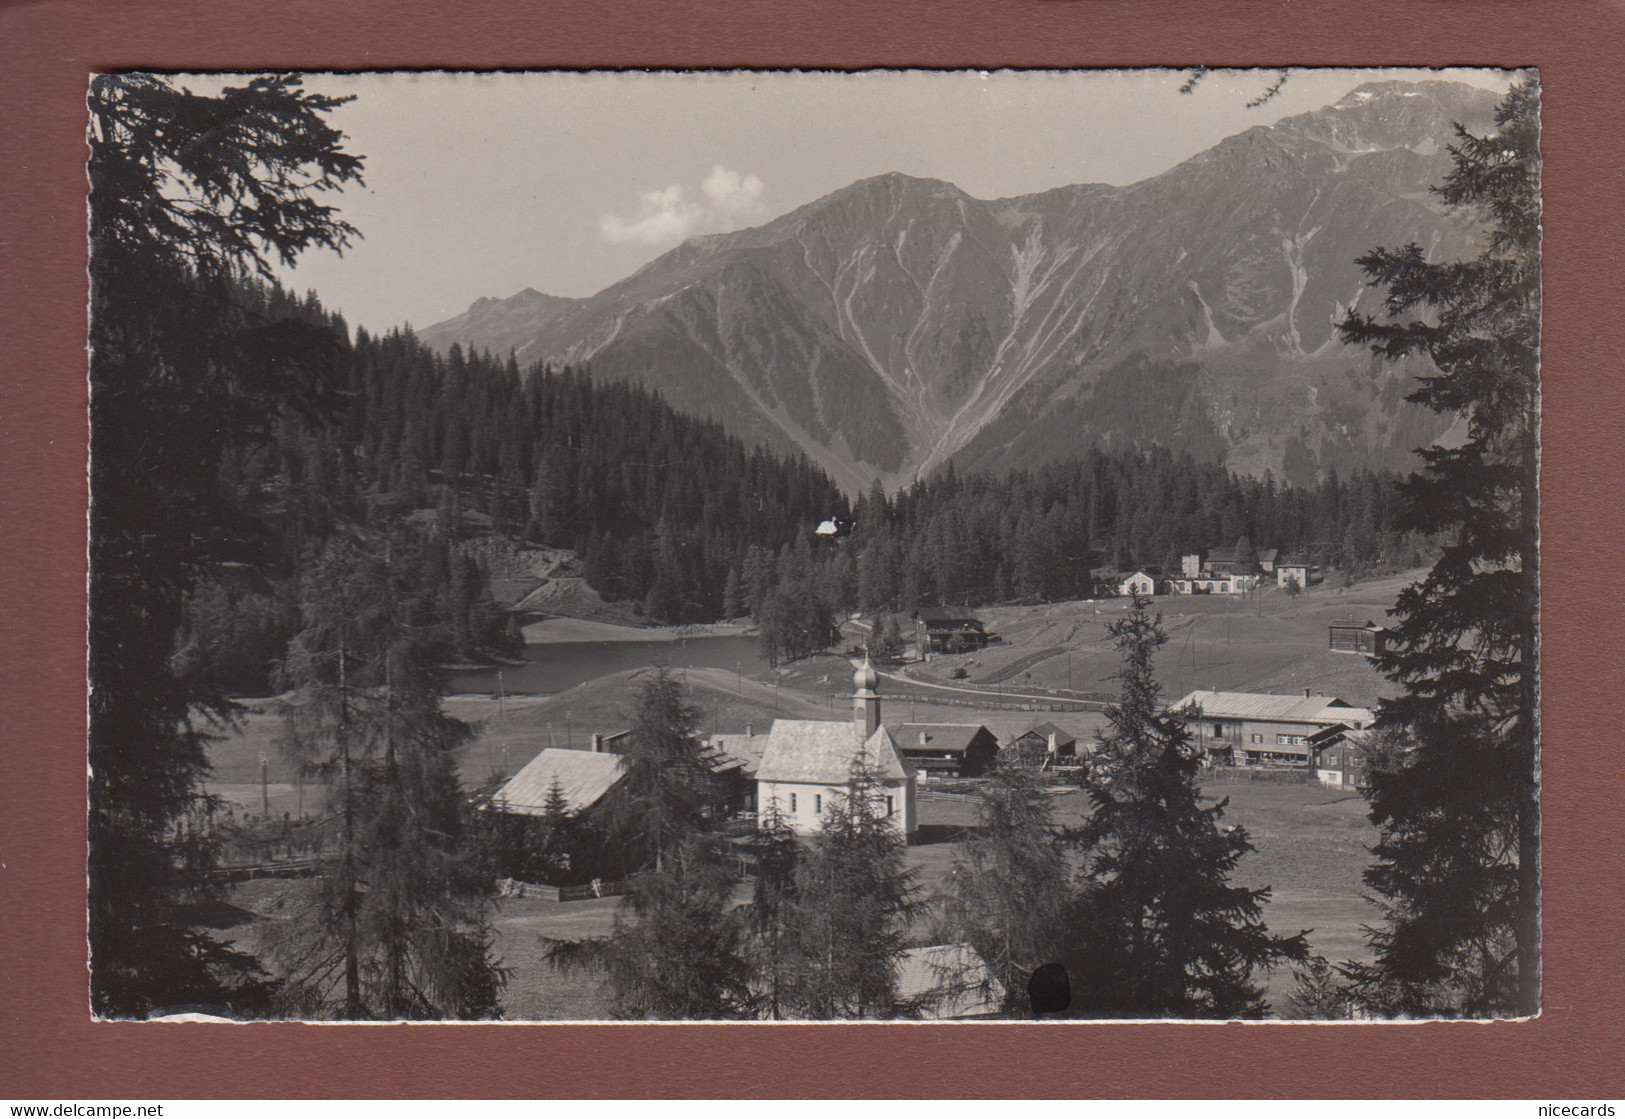 LARET Ob Klosters - Schwarzsee - Klosters